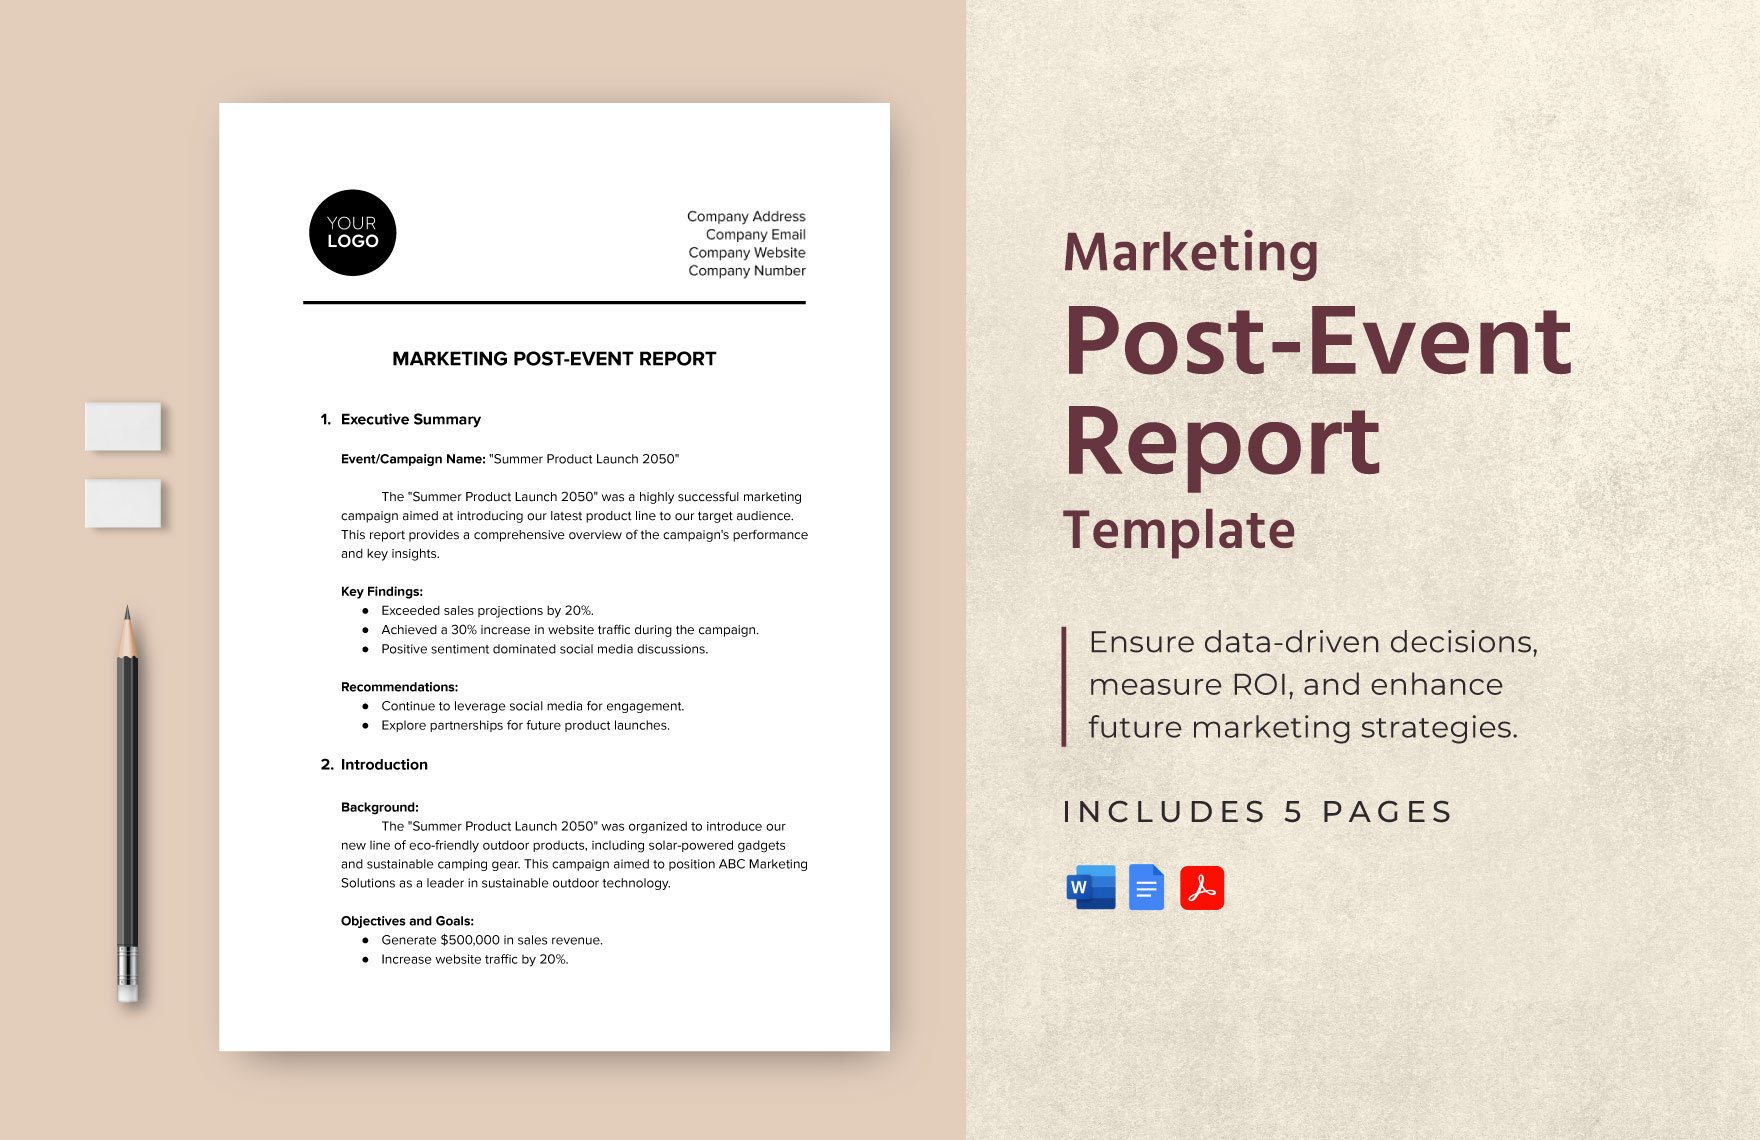 Marketing Post-Event Report Template